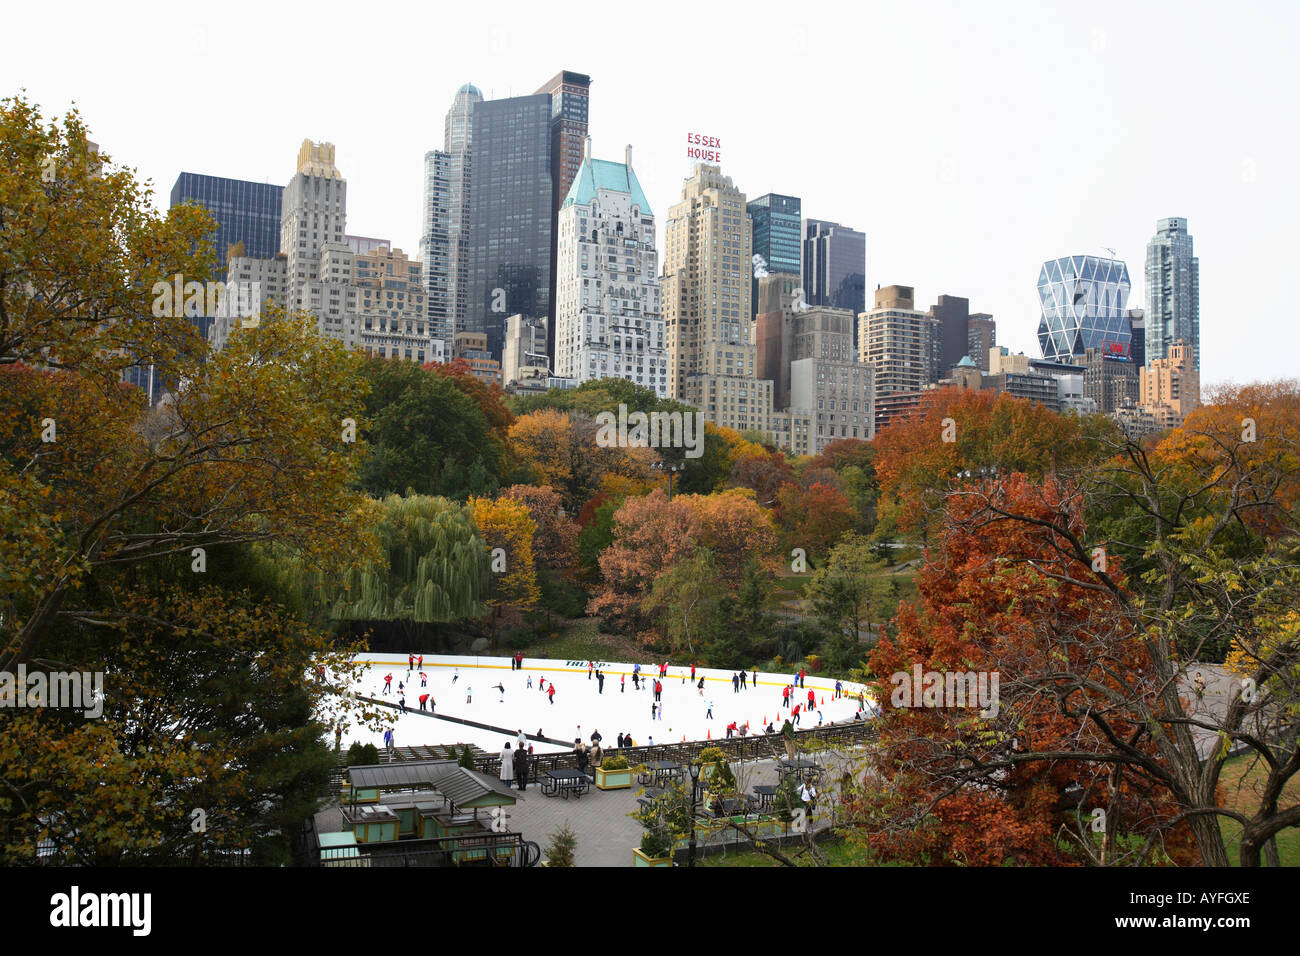 Ice Rink in Central Park, New York City Stock Photo